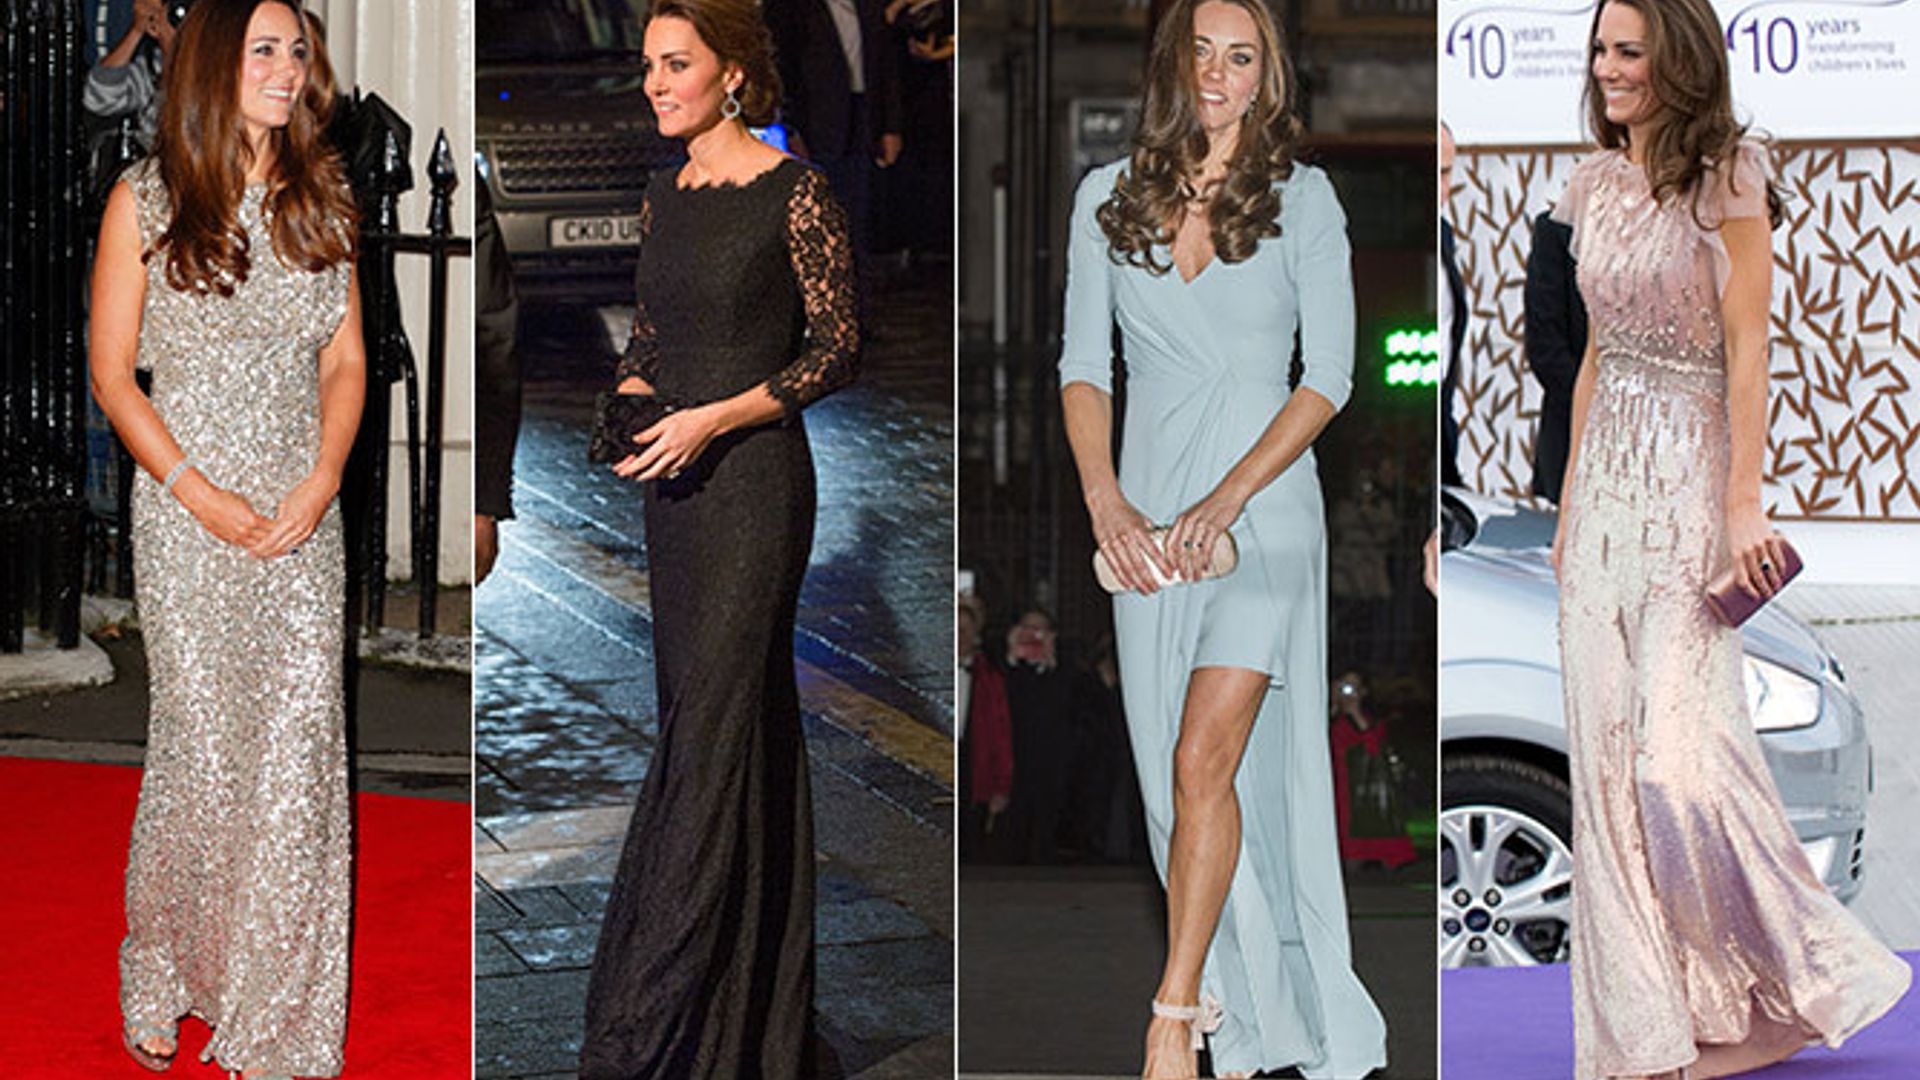 Did You Know Kate Middleton Wore Two Different Gowns On Her Wedding Day?